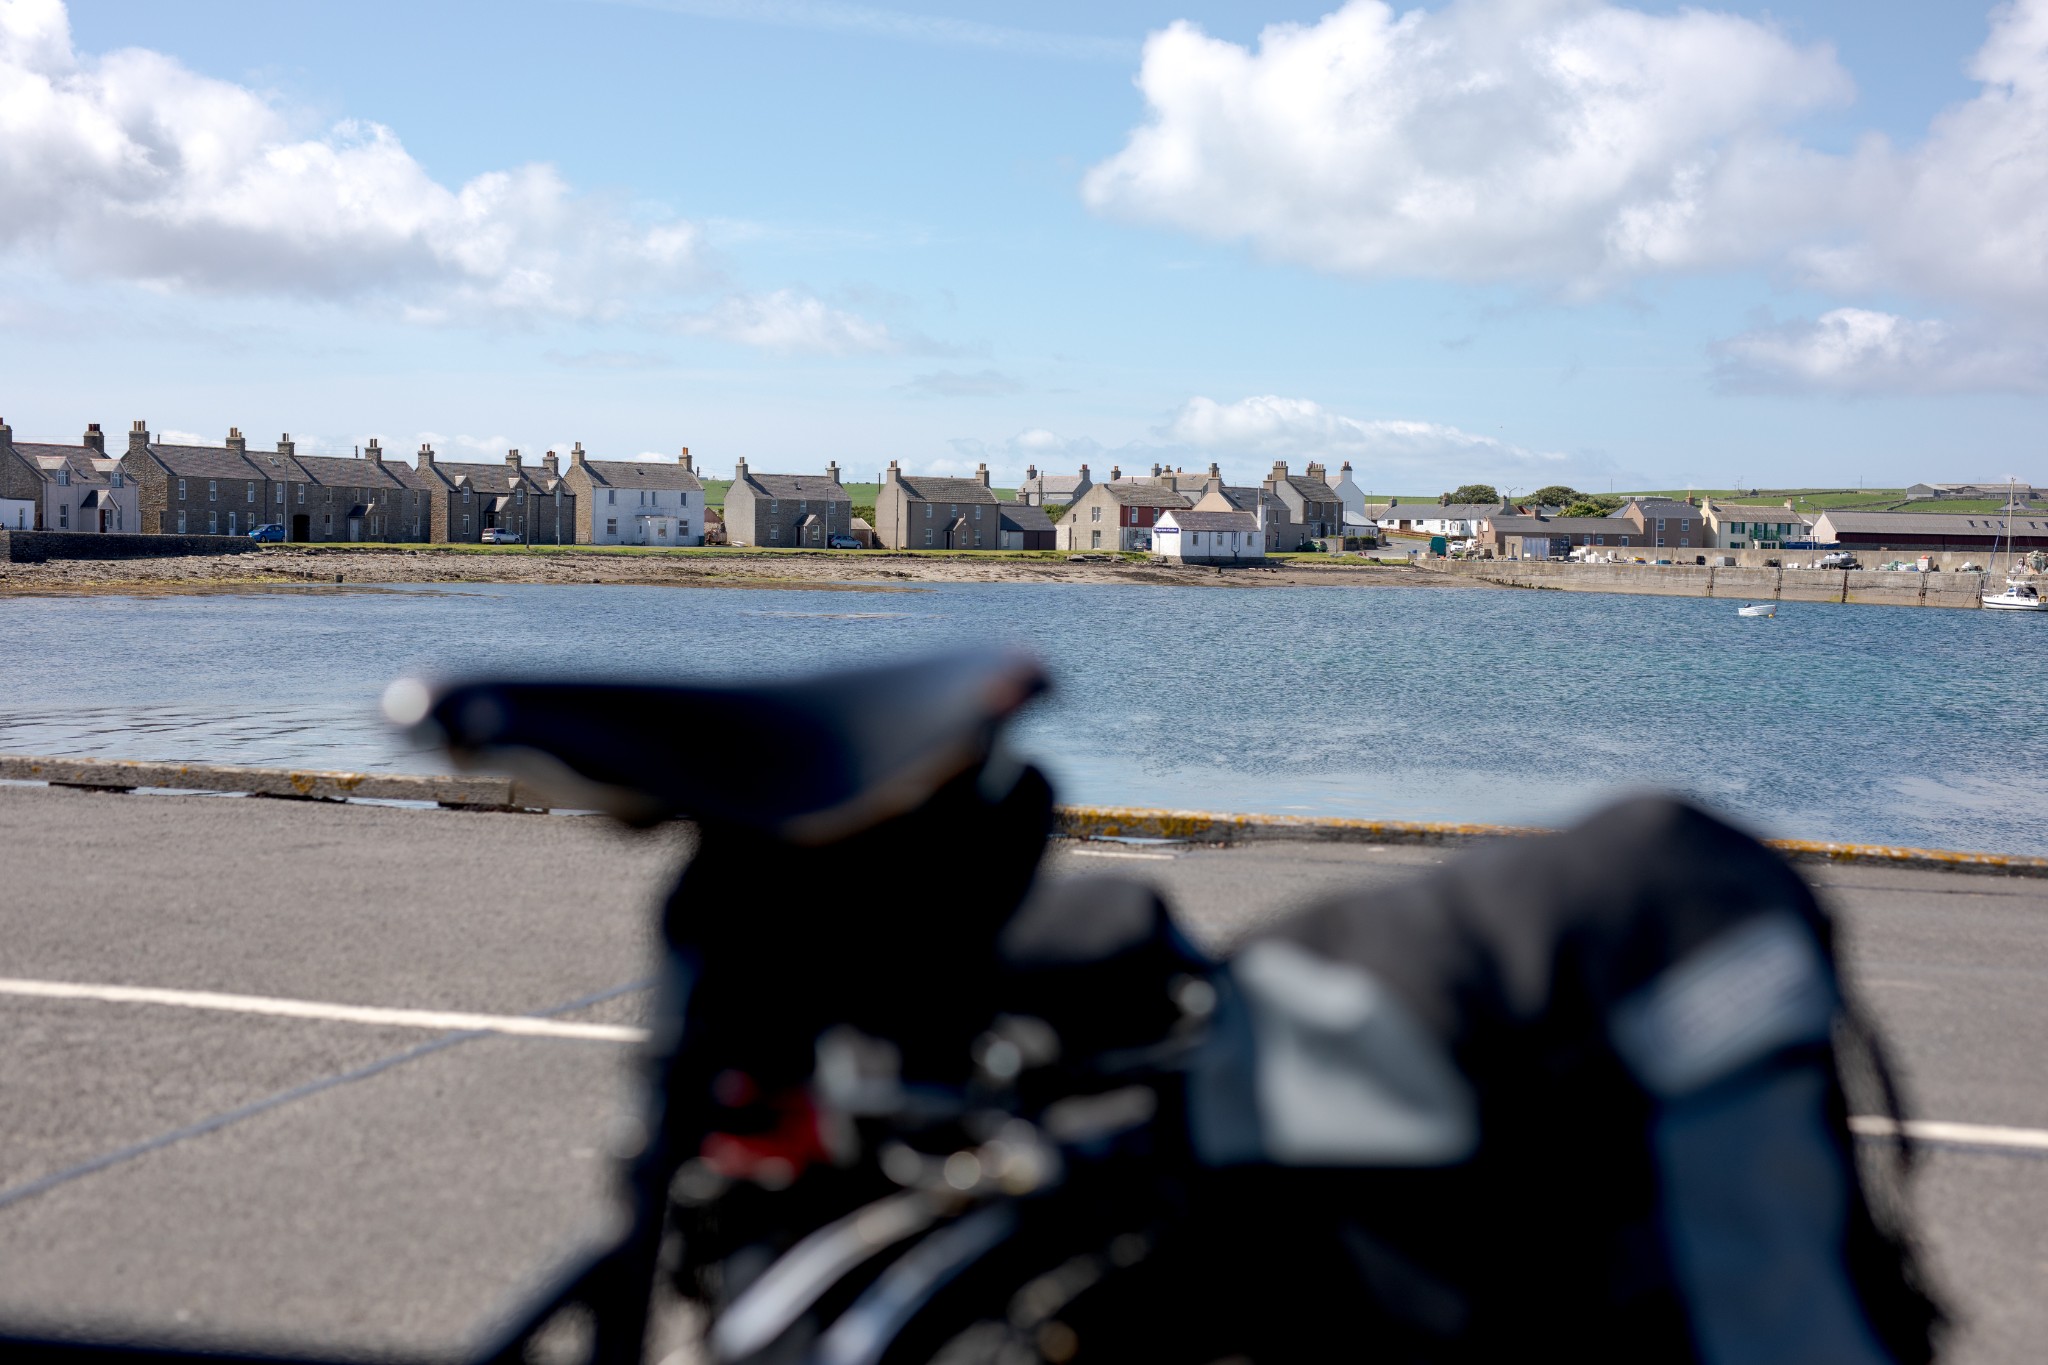 Bicycle in Whitehall, Stronsay, Orkney